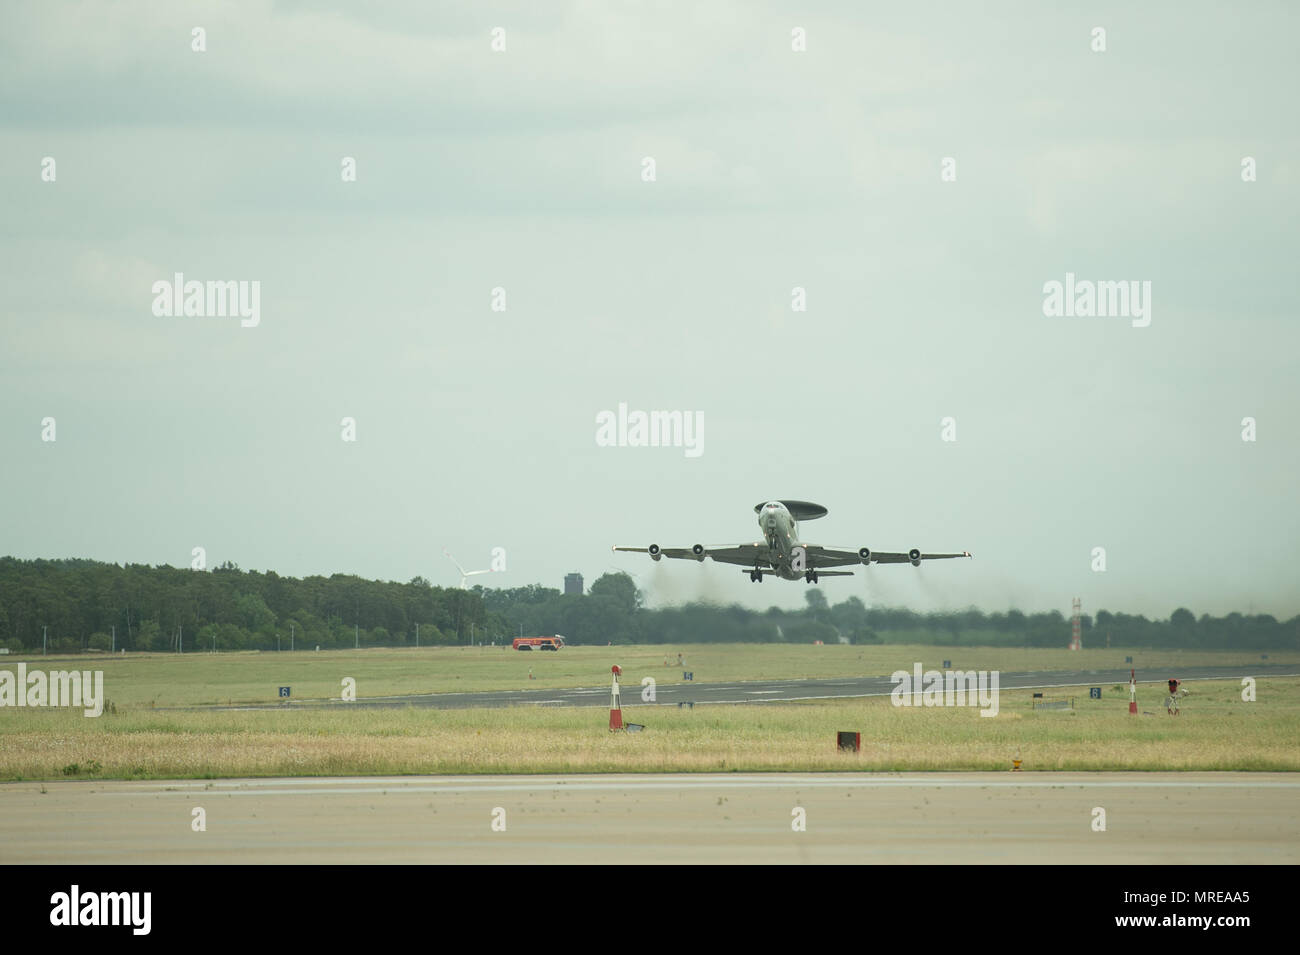 An E-3 Sentry Airborne Warning and Control System aircraft takes off June 12, 2017, at NATO Air Base Geilenkirchen, Germany, during a mission supporting the BALTOPS 2017 exercise. The E-3 Sentry and nearly 100 Reservists from the 513th Air Control Group are deployed in support of BALTOPS 2017, which is the first time a U.S. E-3 Sentry has supported a NATO exercise in 20 years. (U.S. Air Force photo/2nd Lt. Caleb Wanzer) Stock Photo